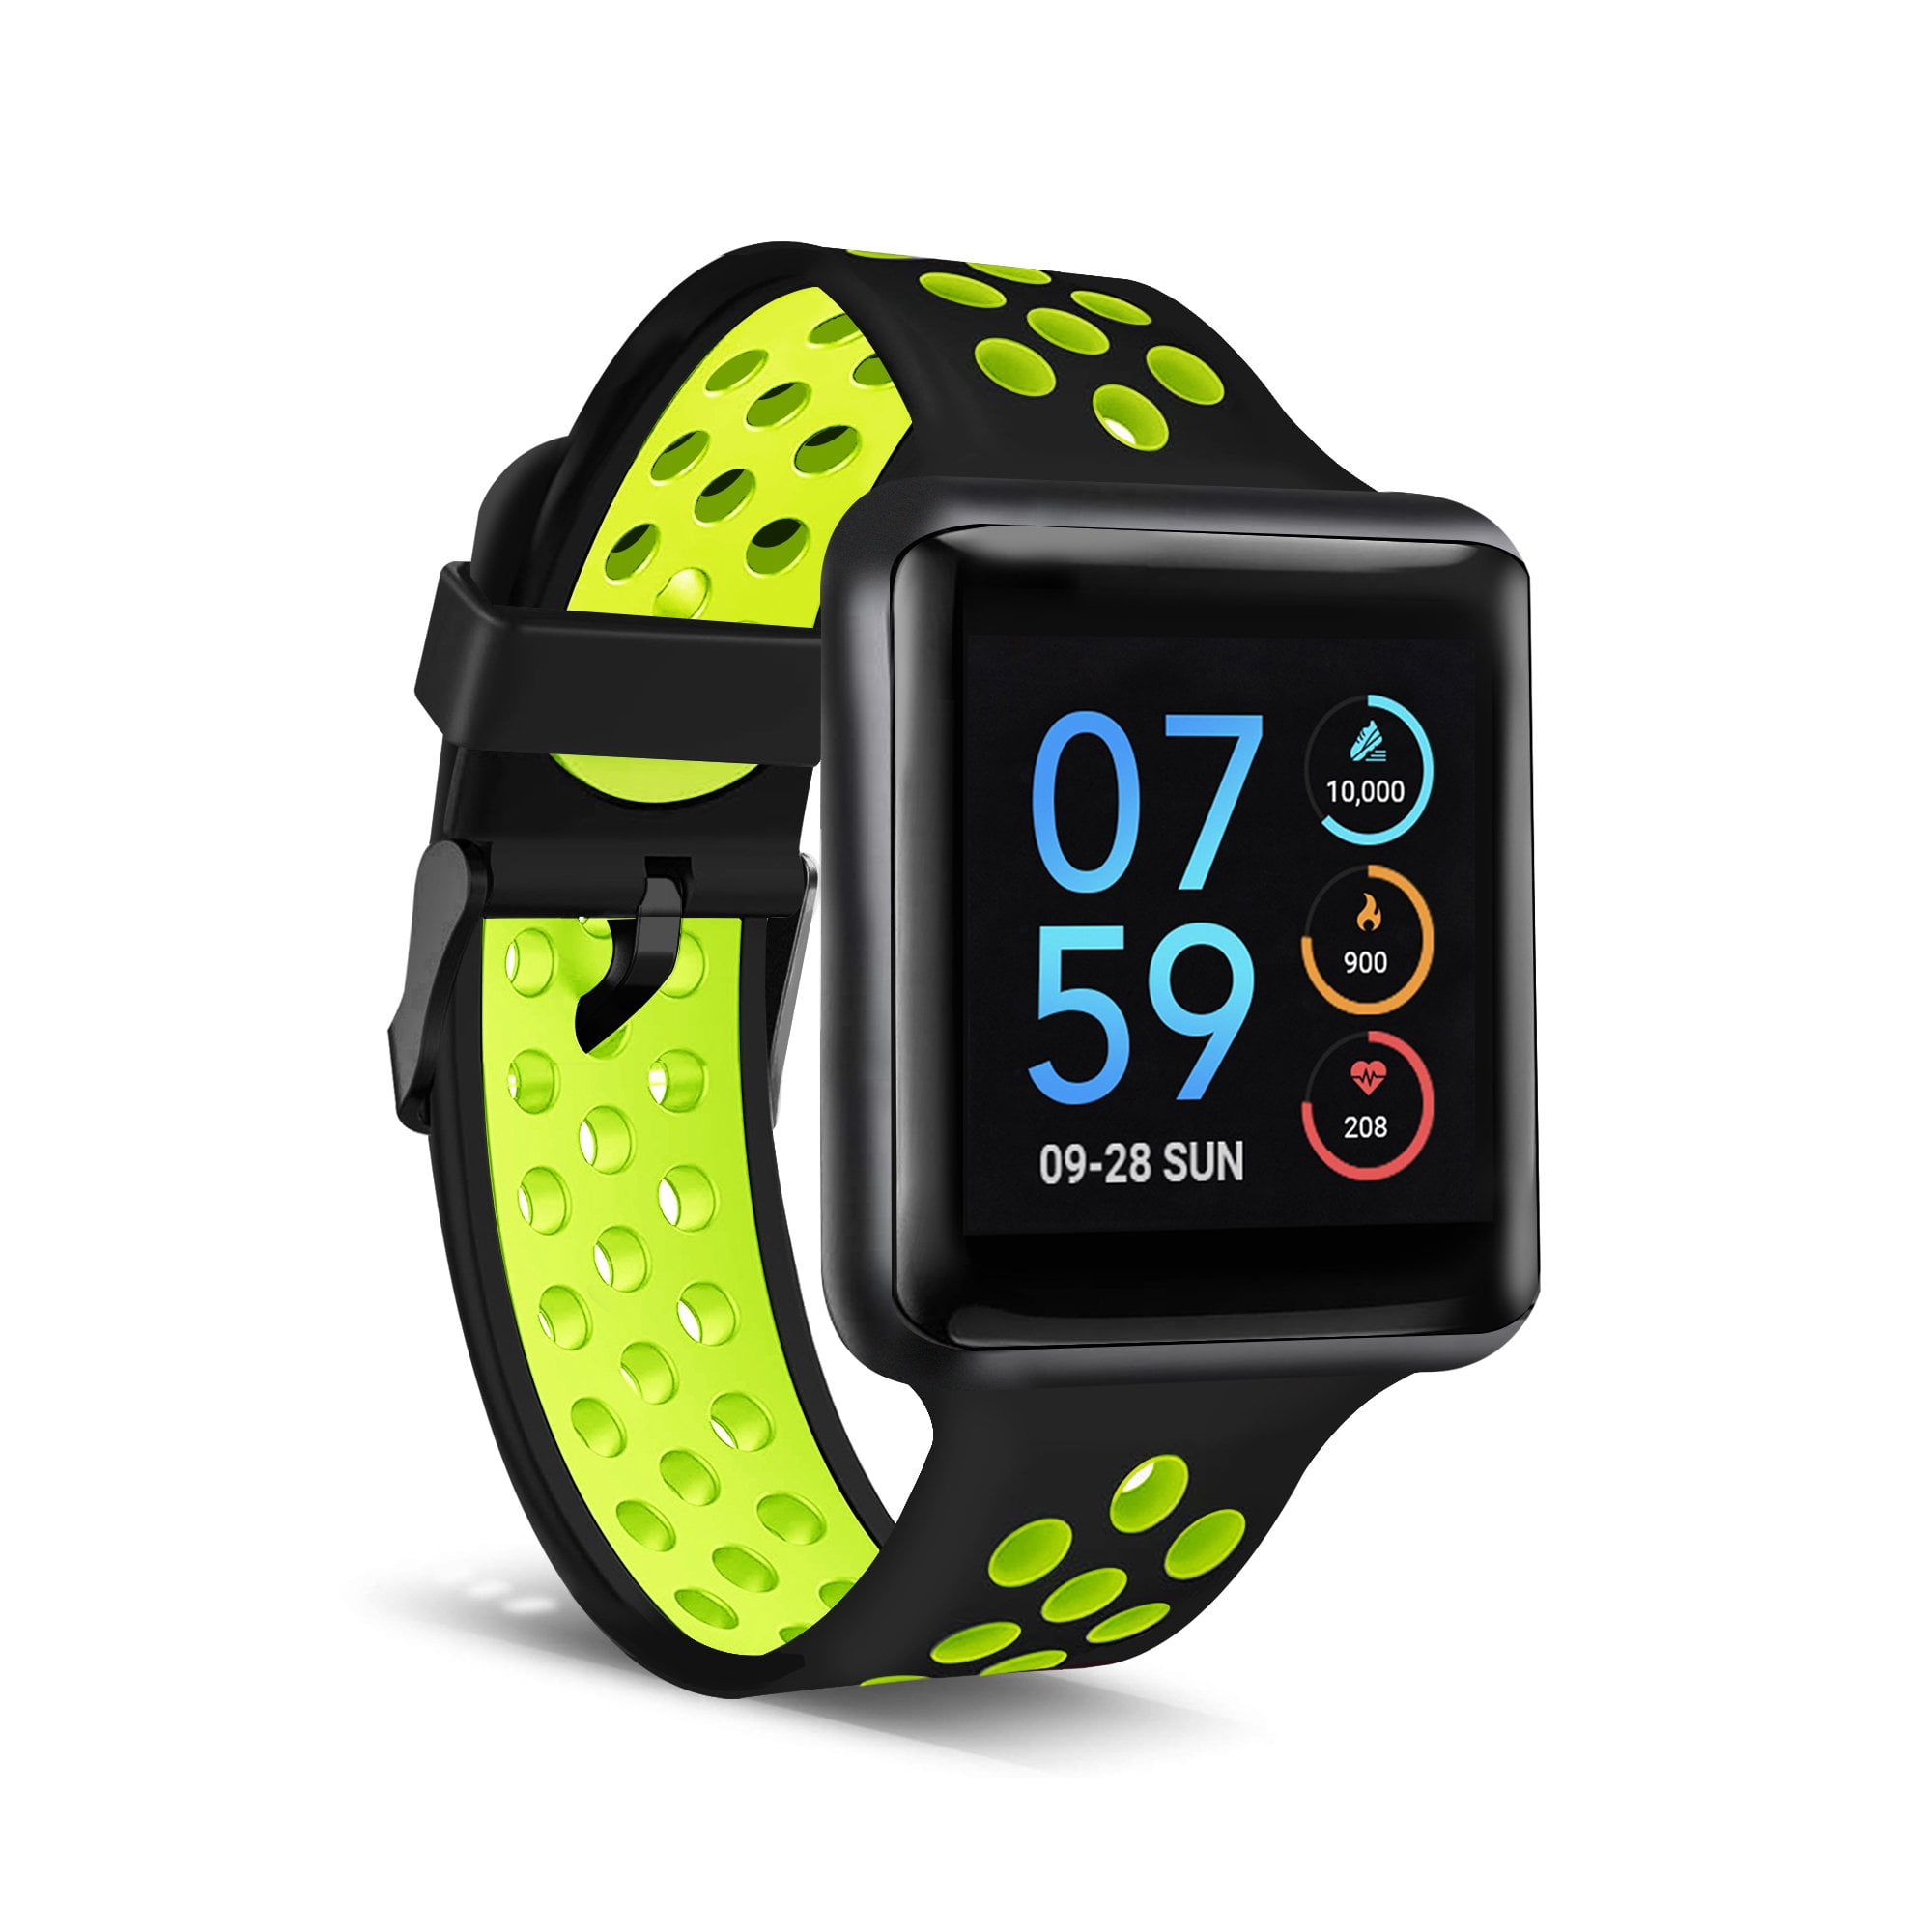 iTouch - iTouch Air SE Unisex Rubber Smartwatch Fitness Tracker Green/Black - Walmart.com ...